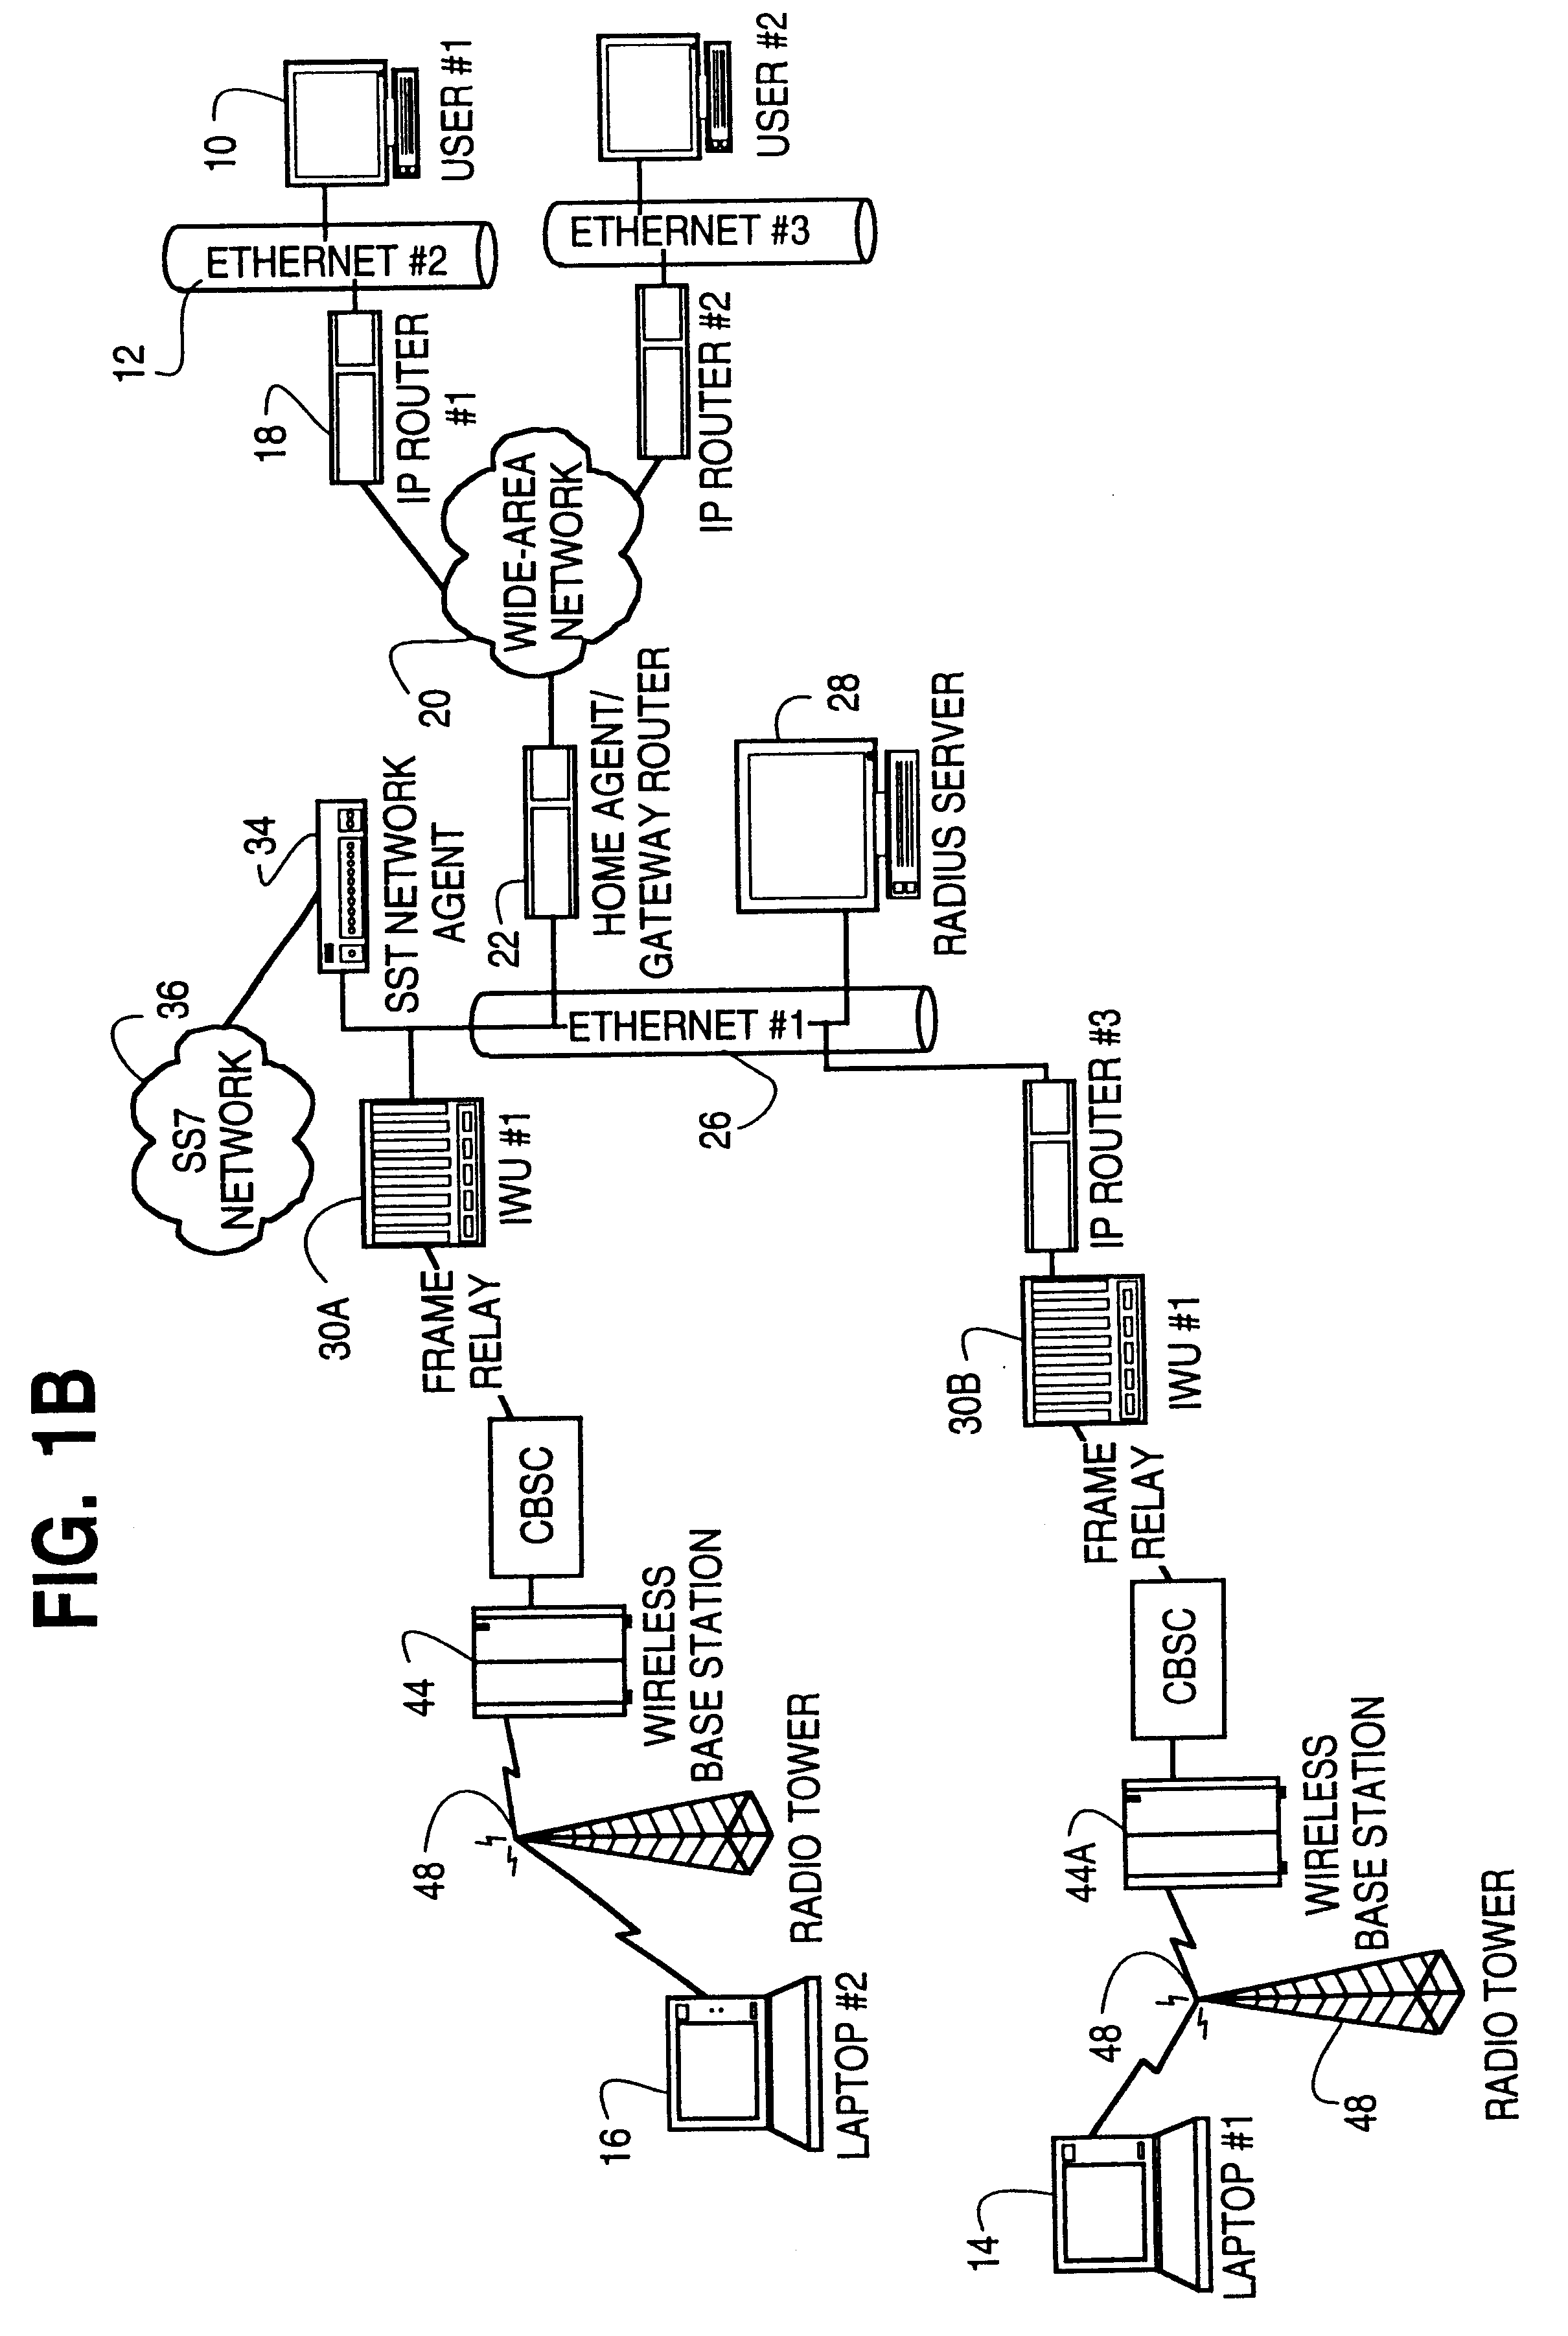 Dynamic allocation of wireless mobile nodes over an internet protocol (IP) network